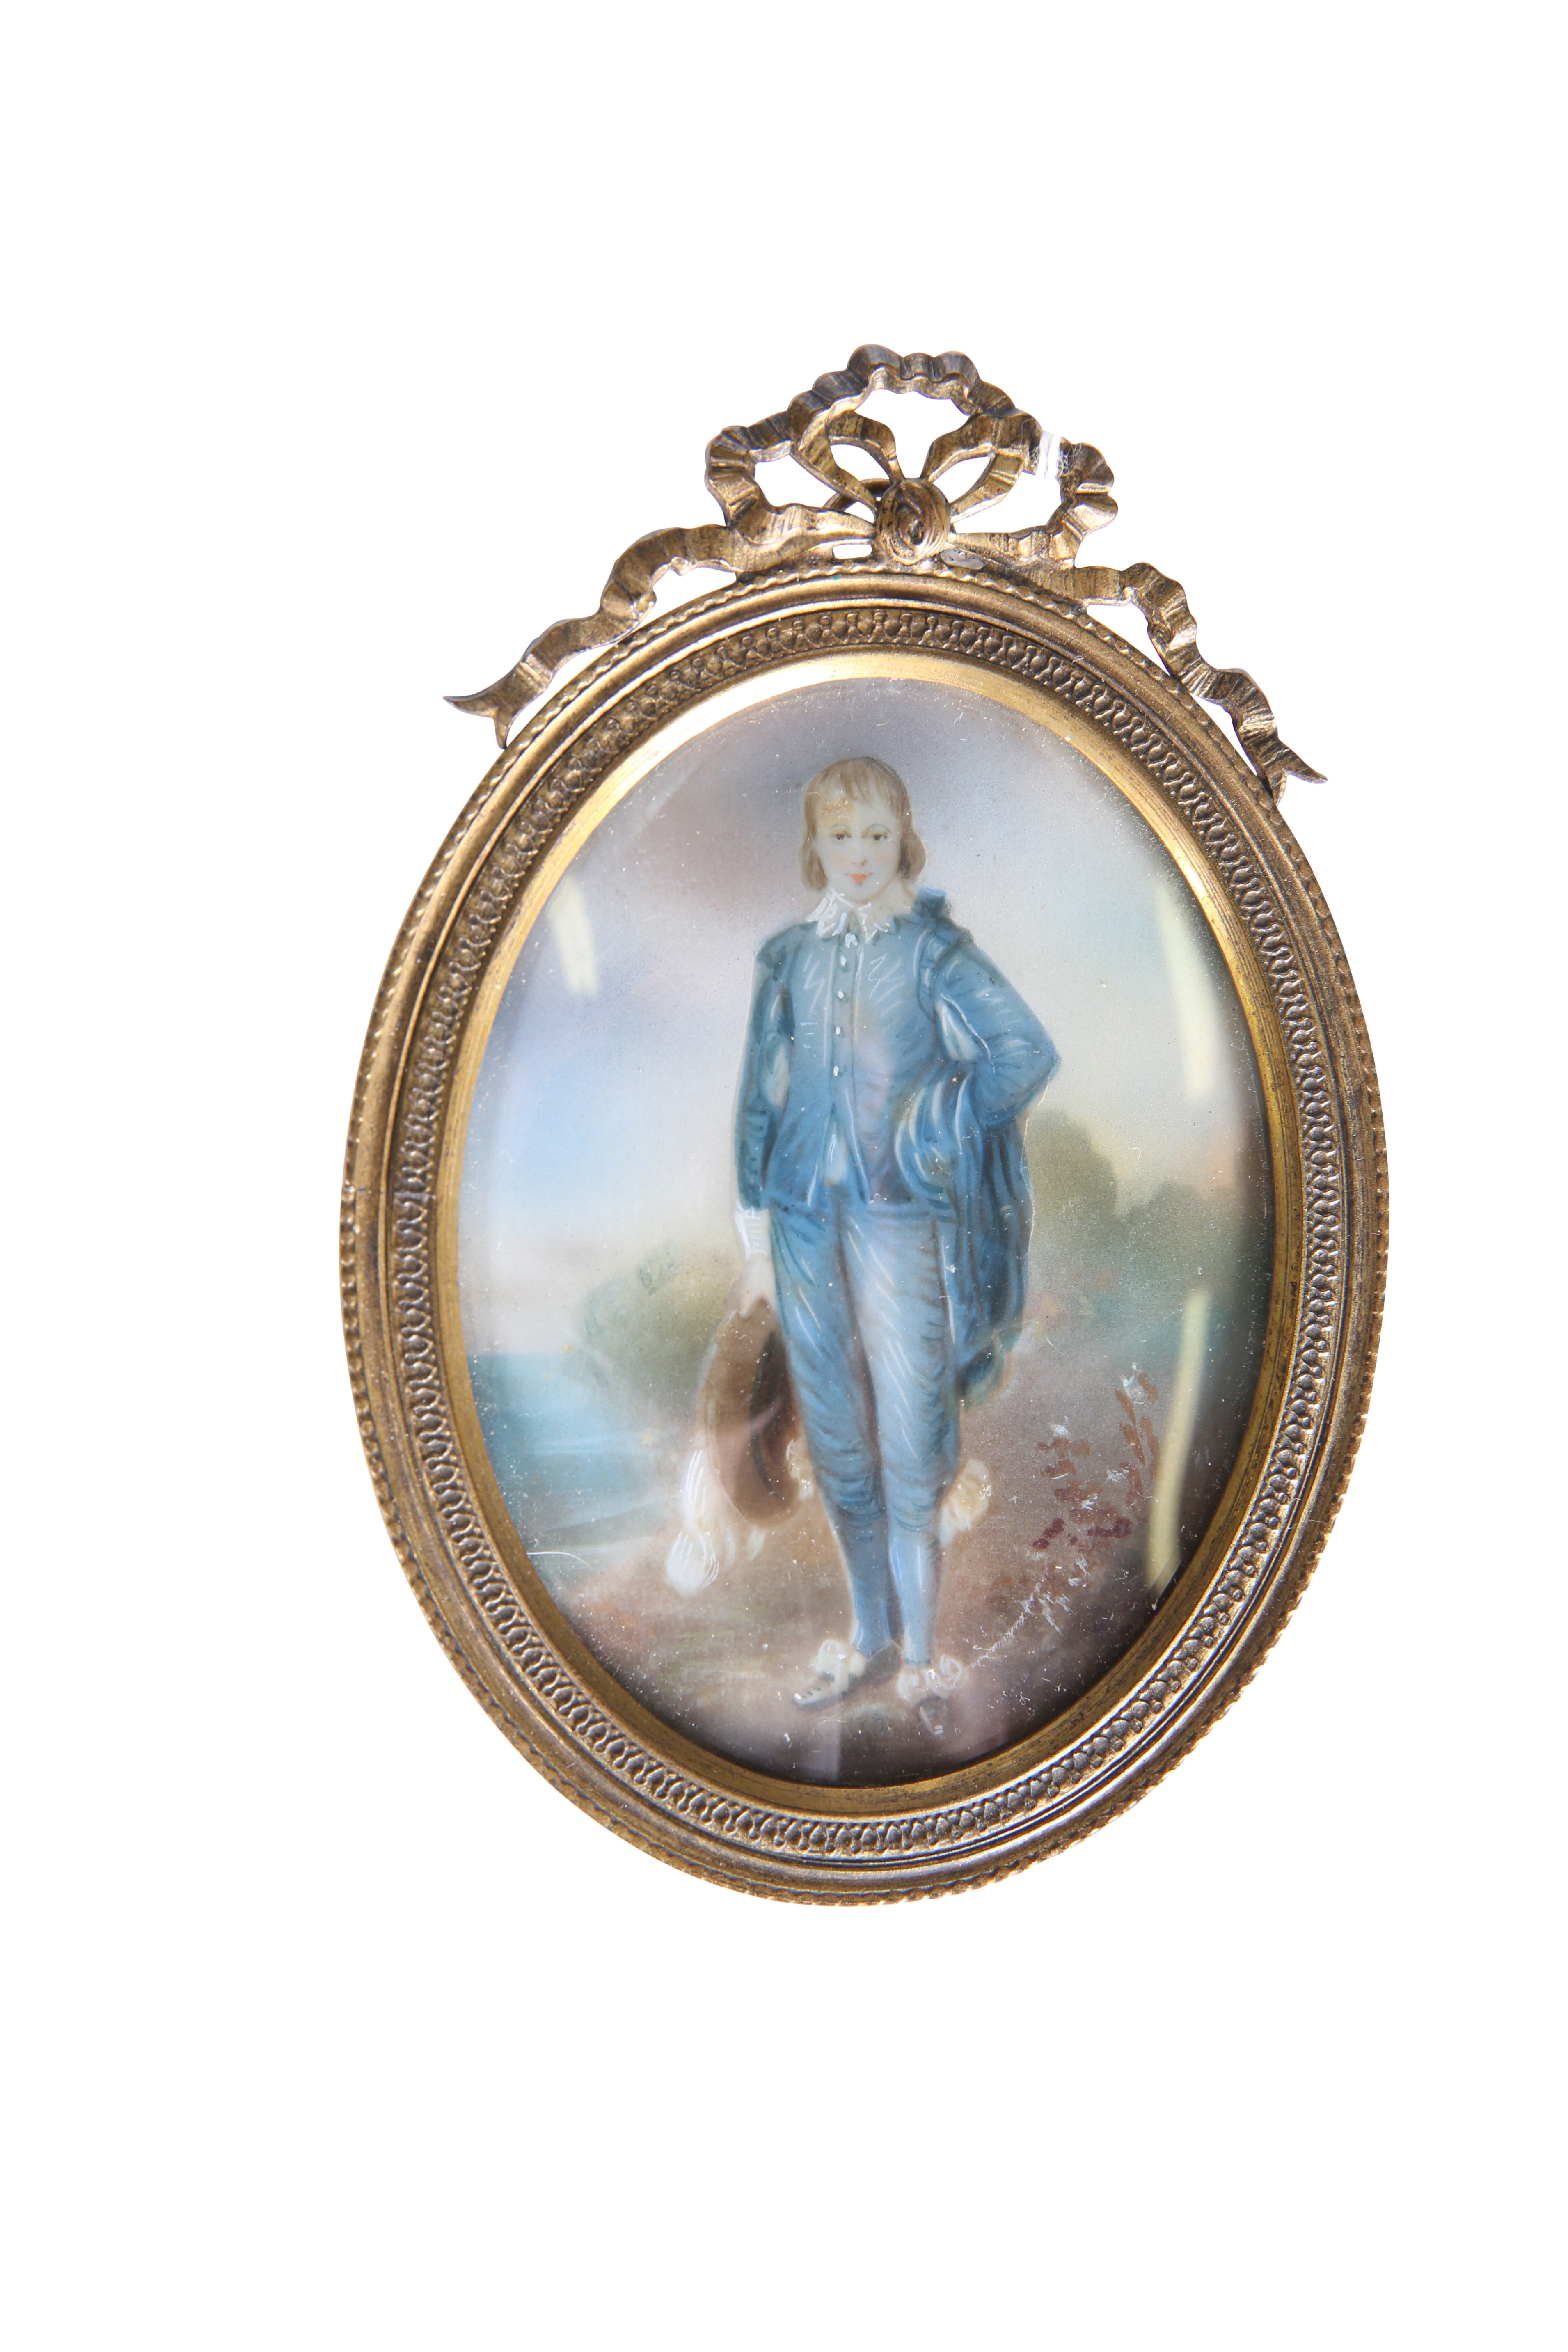 A PORTRAIT MINIATURE OF A YOUNG MAN IN 18TH CENTURY DRESS, c.1900